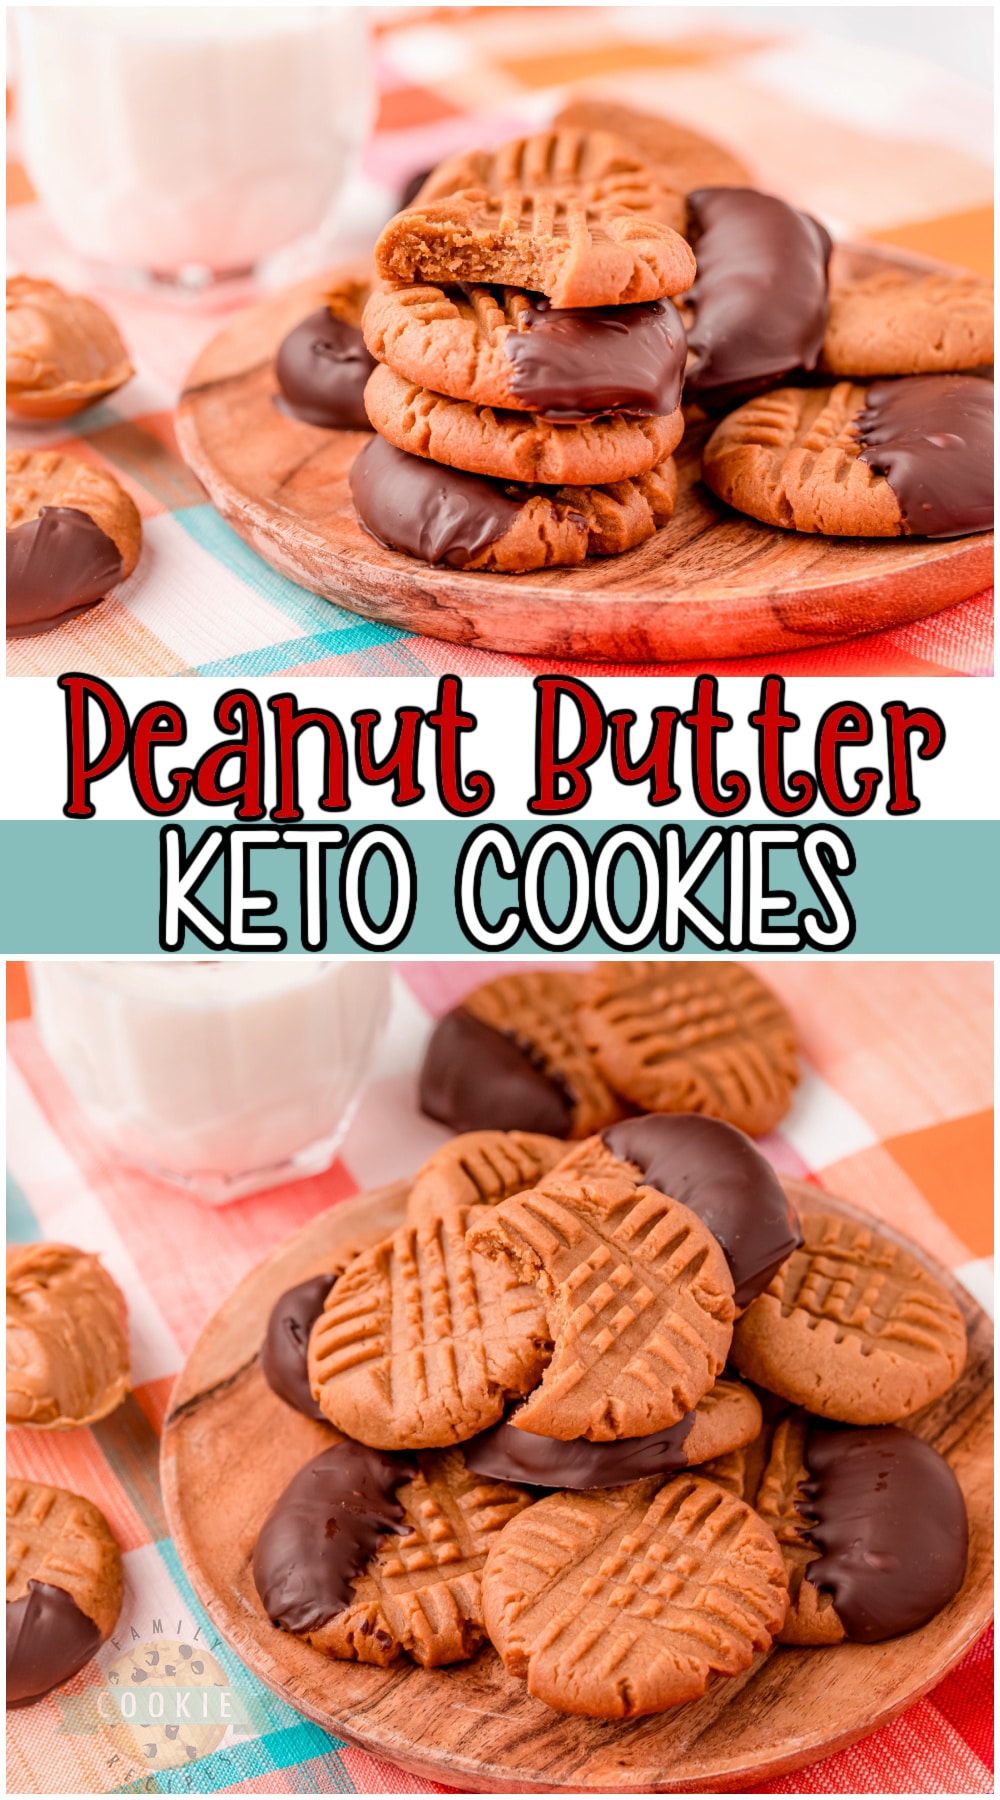 Easy keto peanut butter cookies recipe made with low sugar, creamy peanut butter, and dipped in dark chocolate. Great peanut butter flavor that's satisfying & won't derail your health goals! #keto #cookies #peanutbutter #baking #lowcarb #easyrecipe from FAMiLY COOKIE RECIPES via @buttergirls